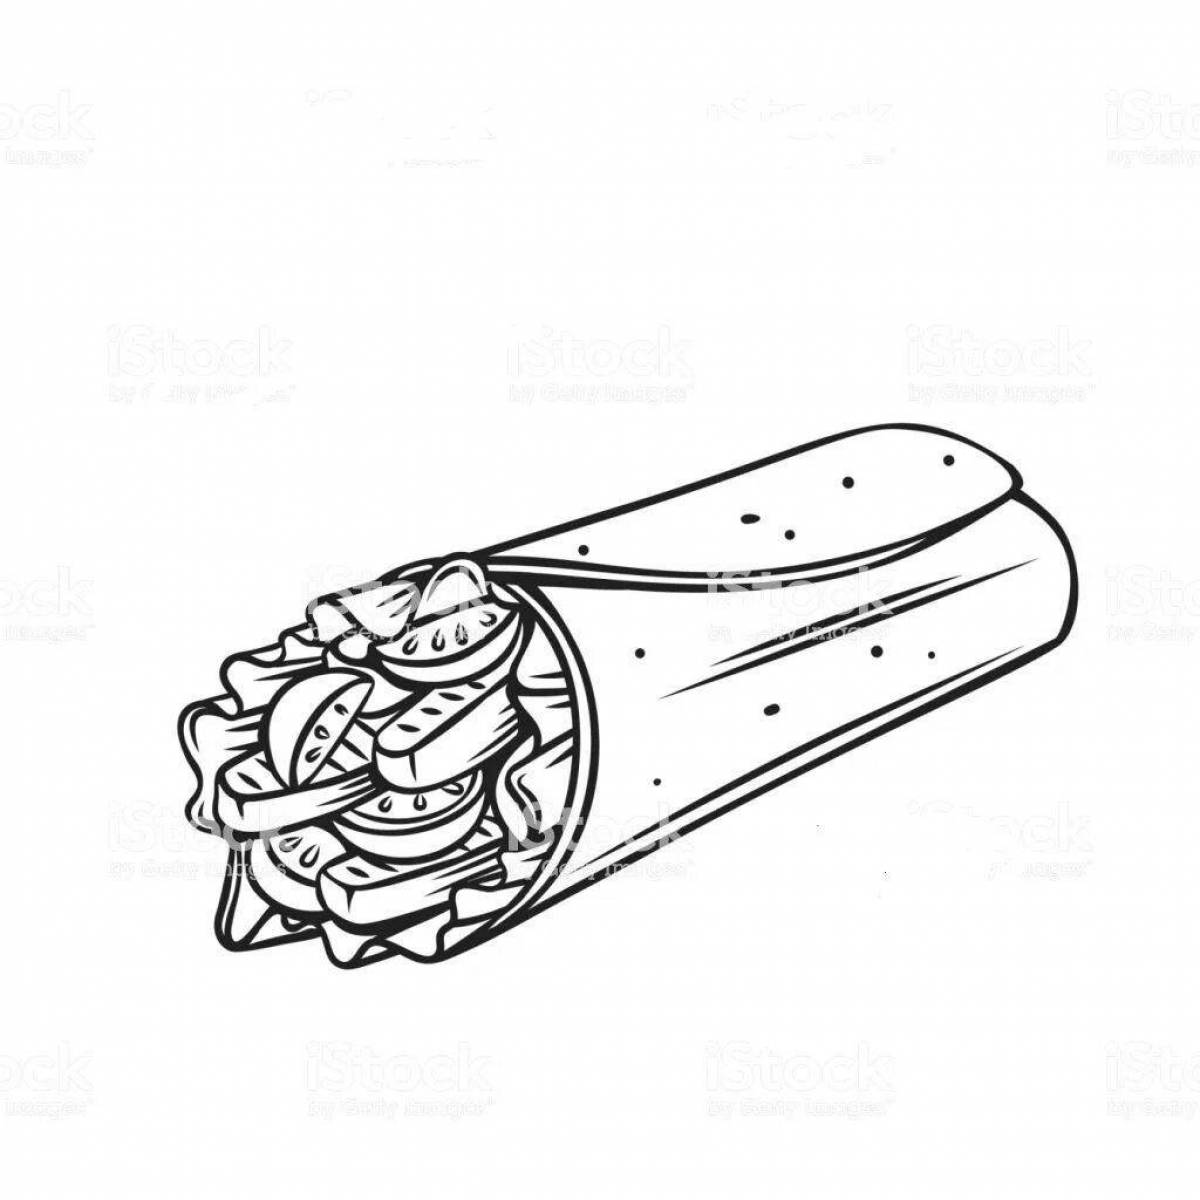 Glowing lavash coloring page